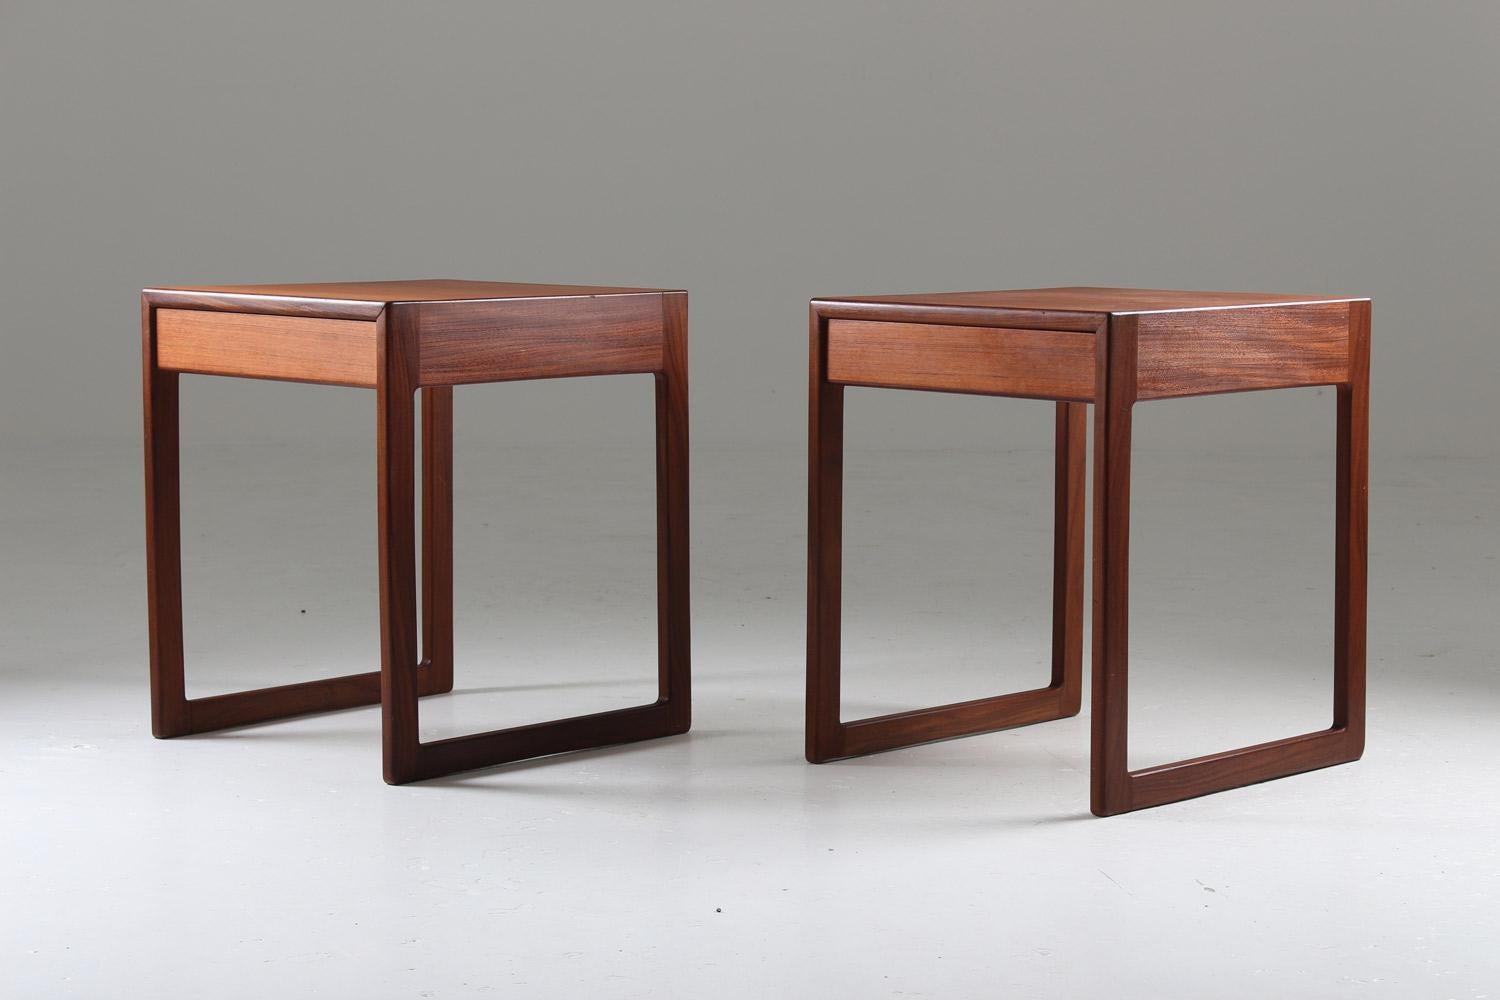 A pair of bedside tables in teak, probably produced in Sweden, 1960s.
These bedside tables show a very minimalistic design with great details. It is made of different shades of teak which contrast beautifully.
Condition: Very good condition. The